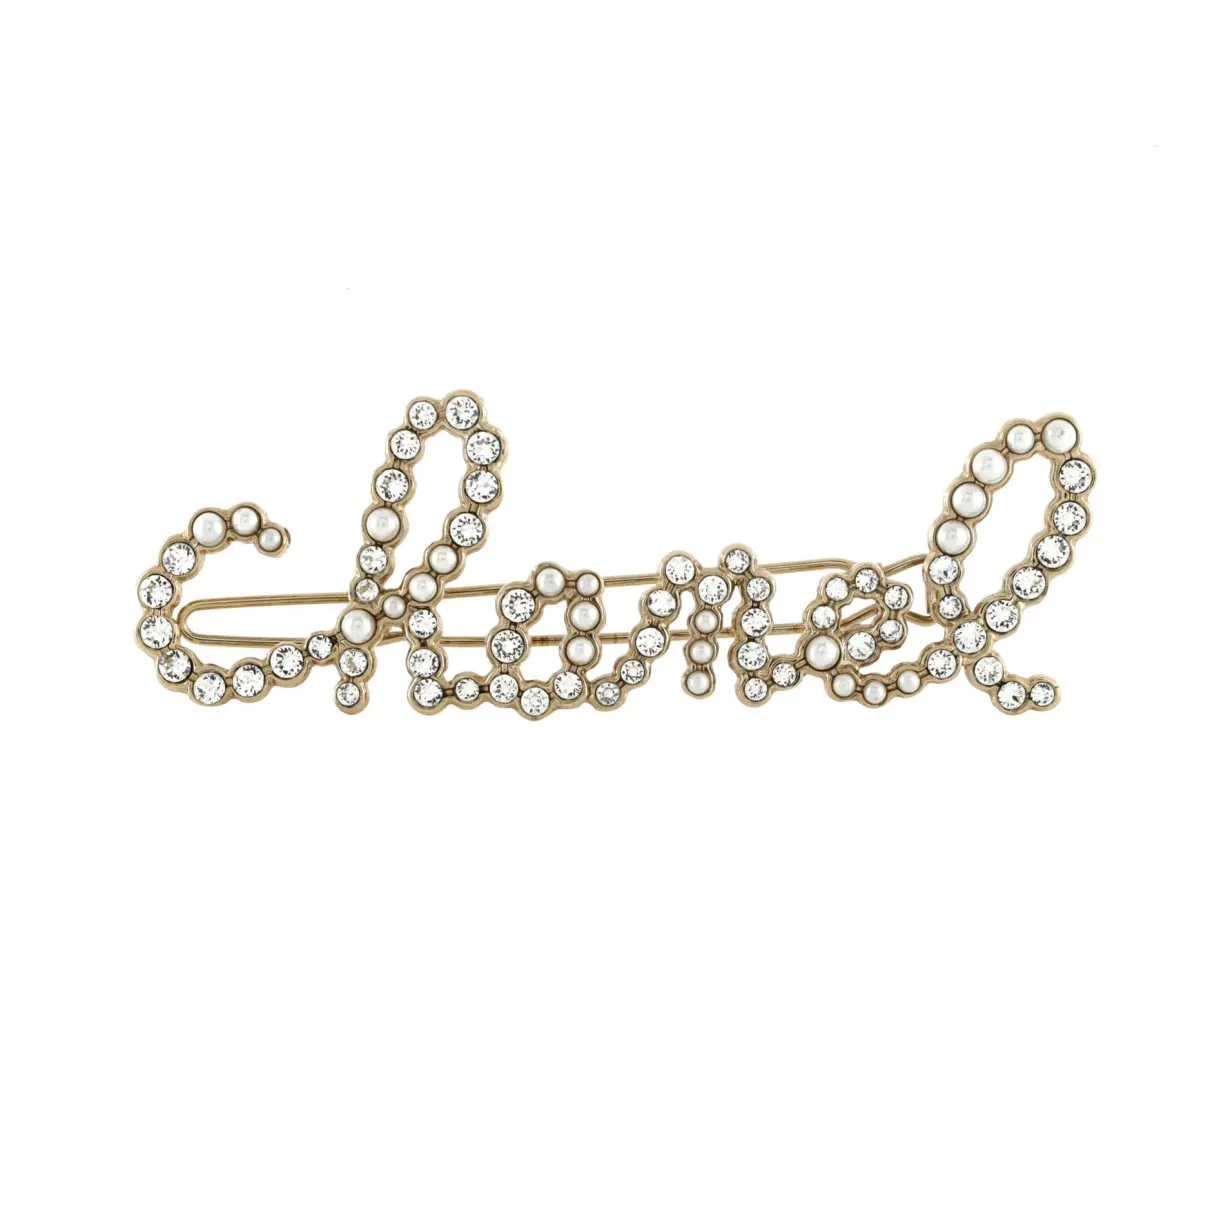 Chanel Women's Hair accessory  Buy or Sell your accessories - Vestiaire  Collective